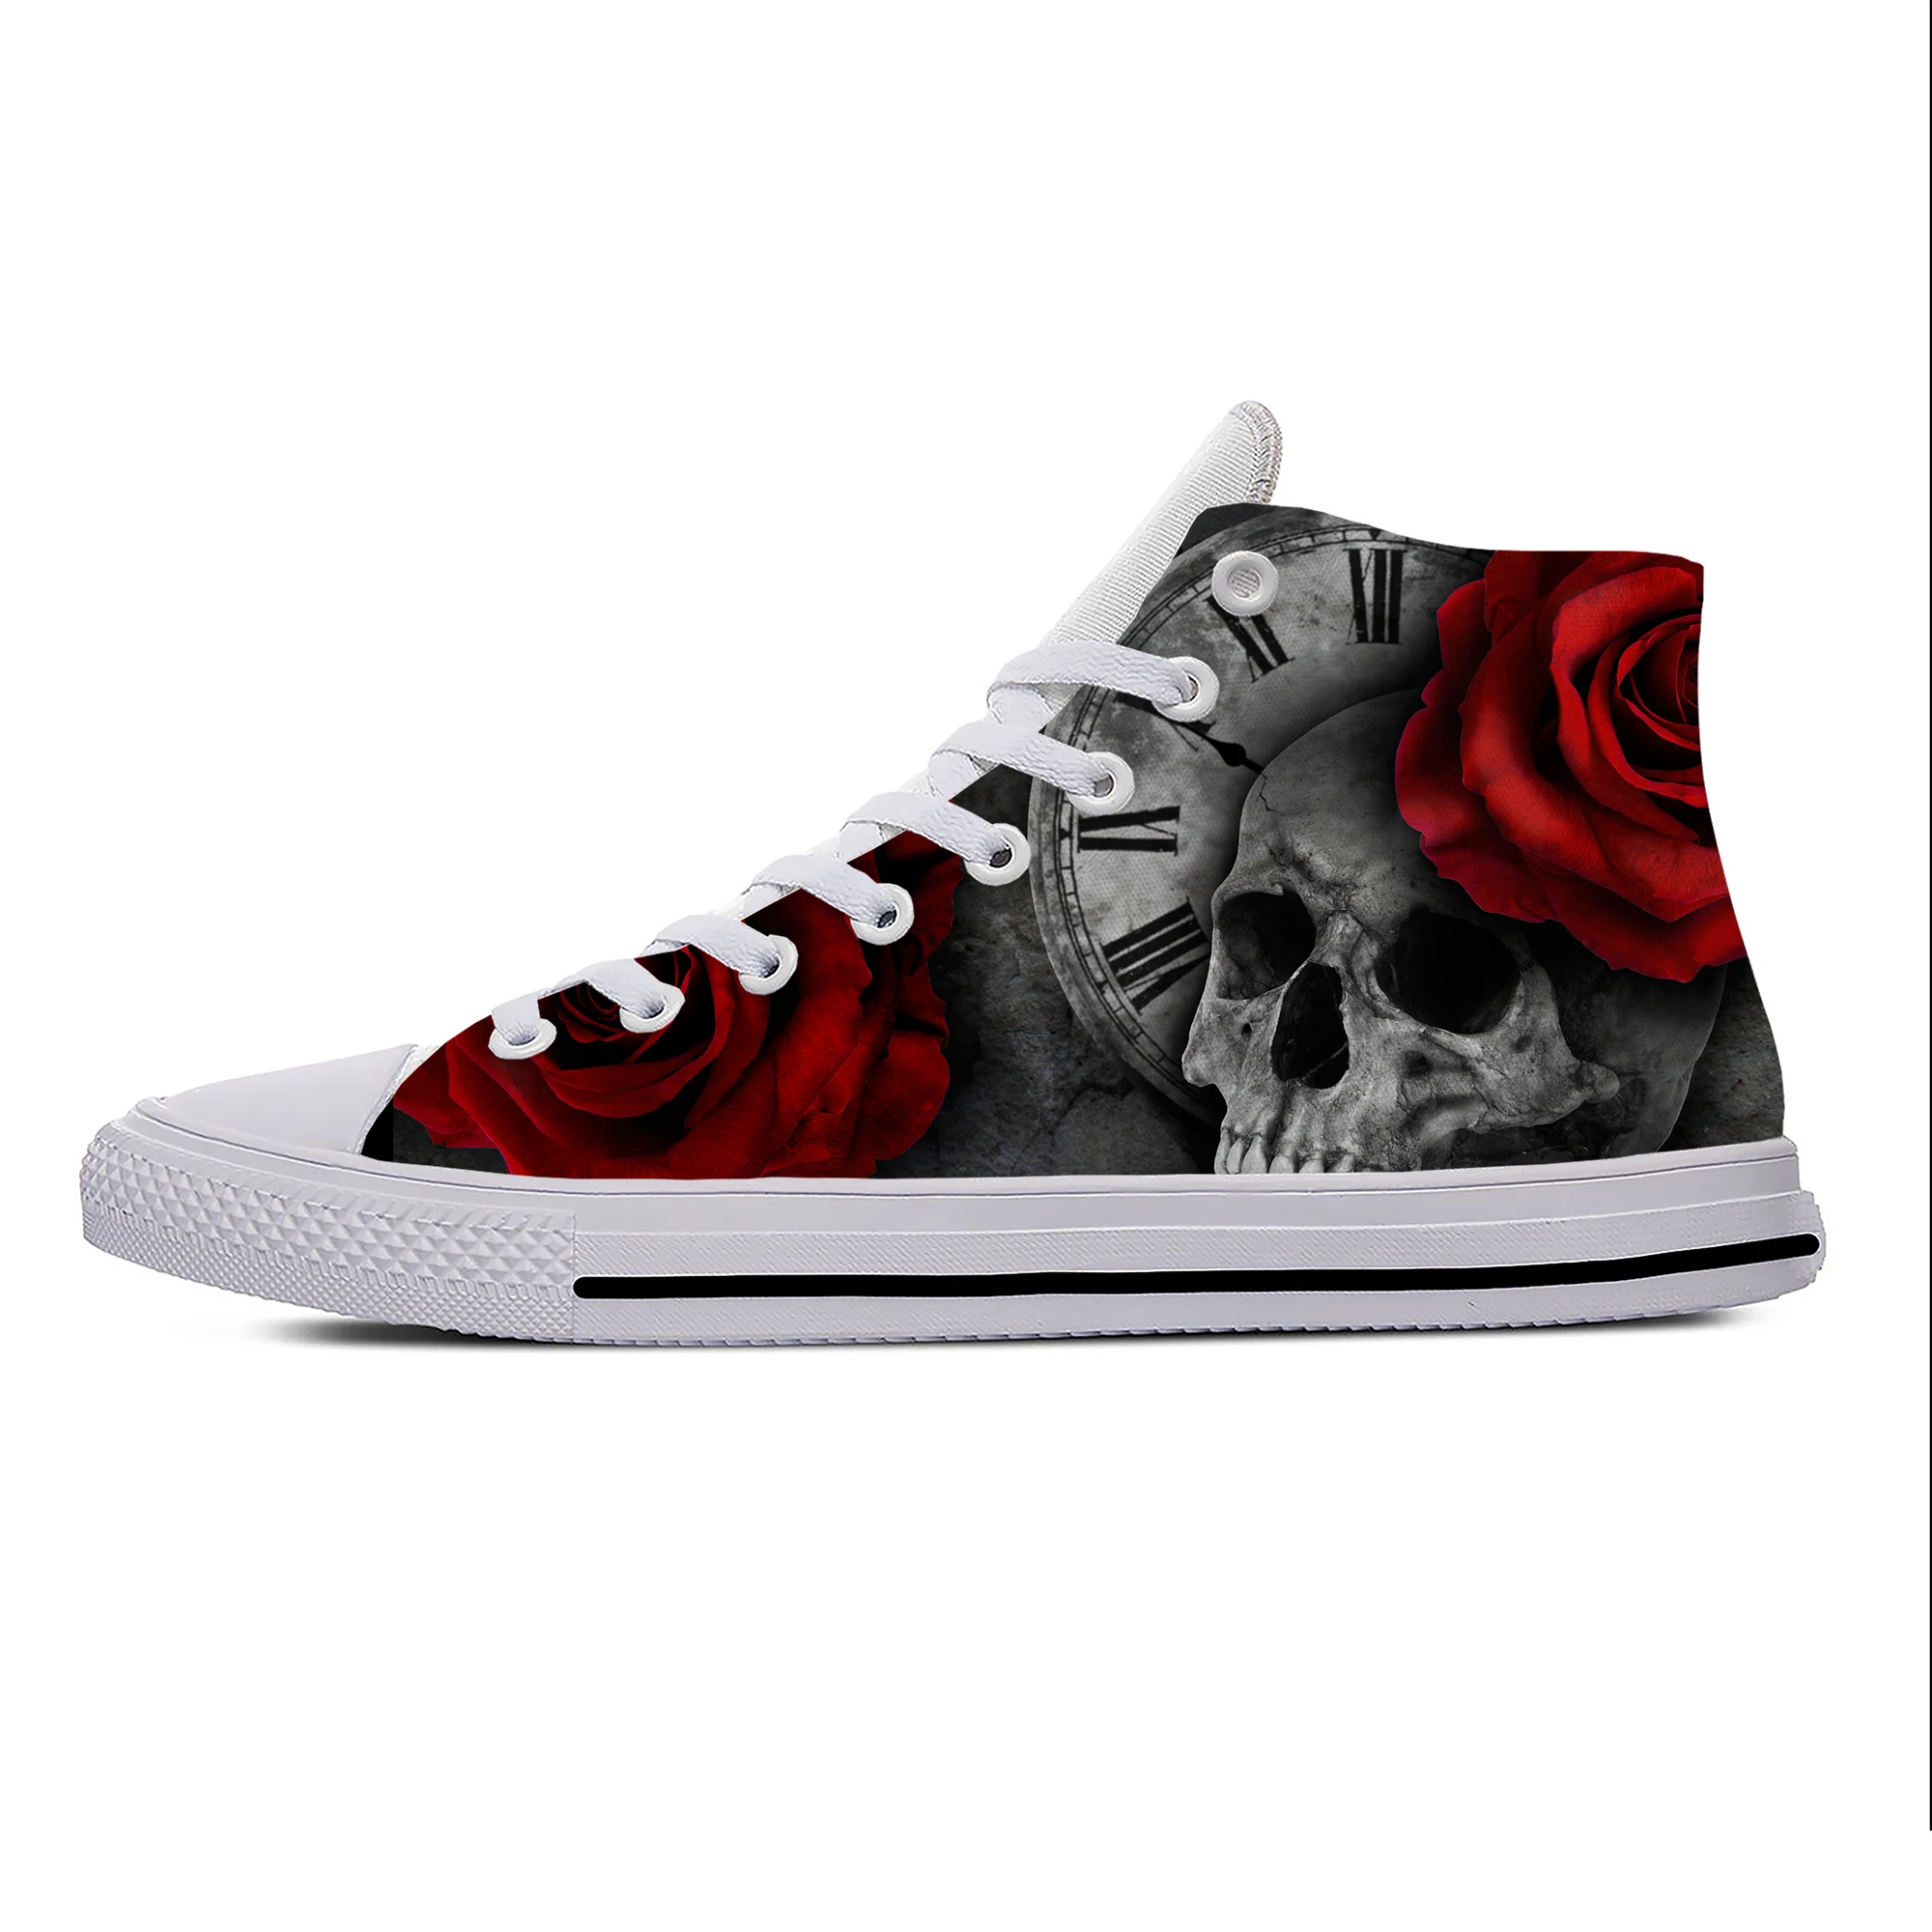 

Skulls Roses High Top Sneakers Mens Womens Teenager Casual Shoes Canvas Running Shoes 3D Printed Breathable Lightweight shoe